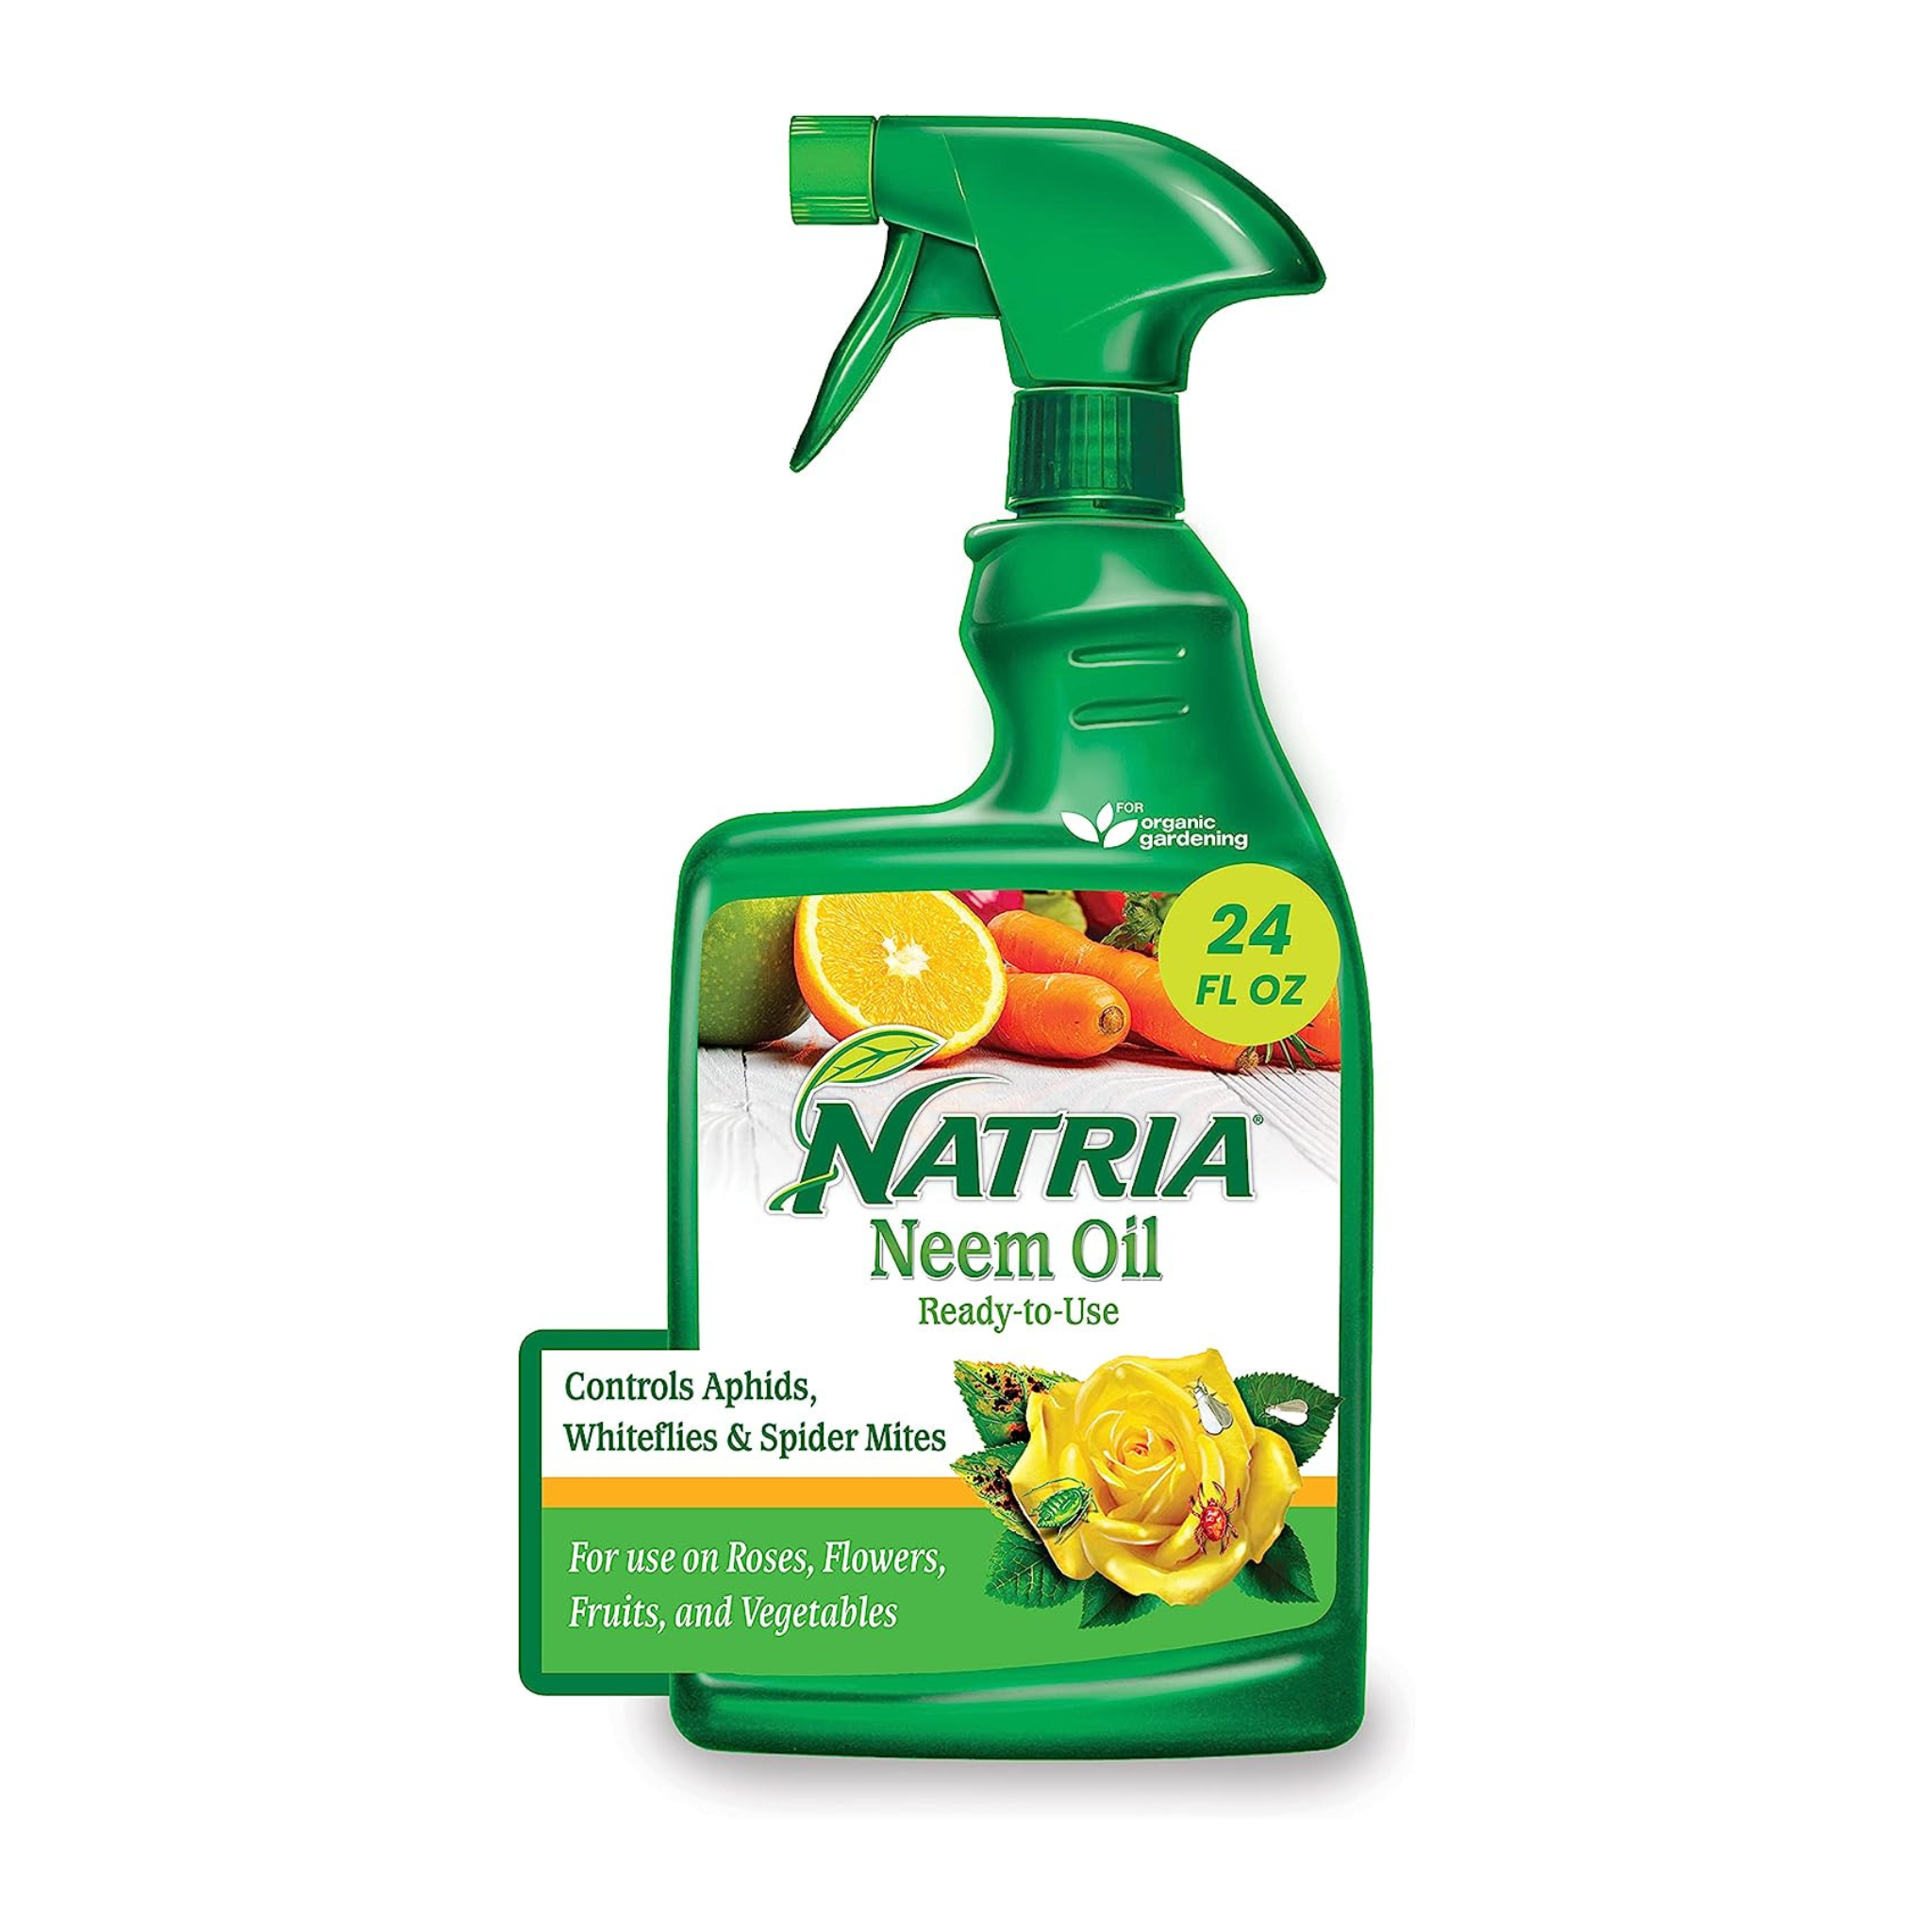 24oz. Natria Ready-to-Use Neem Oil Spray for Plants/Insects